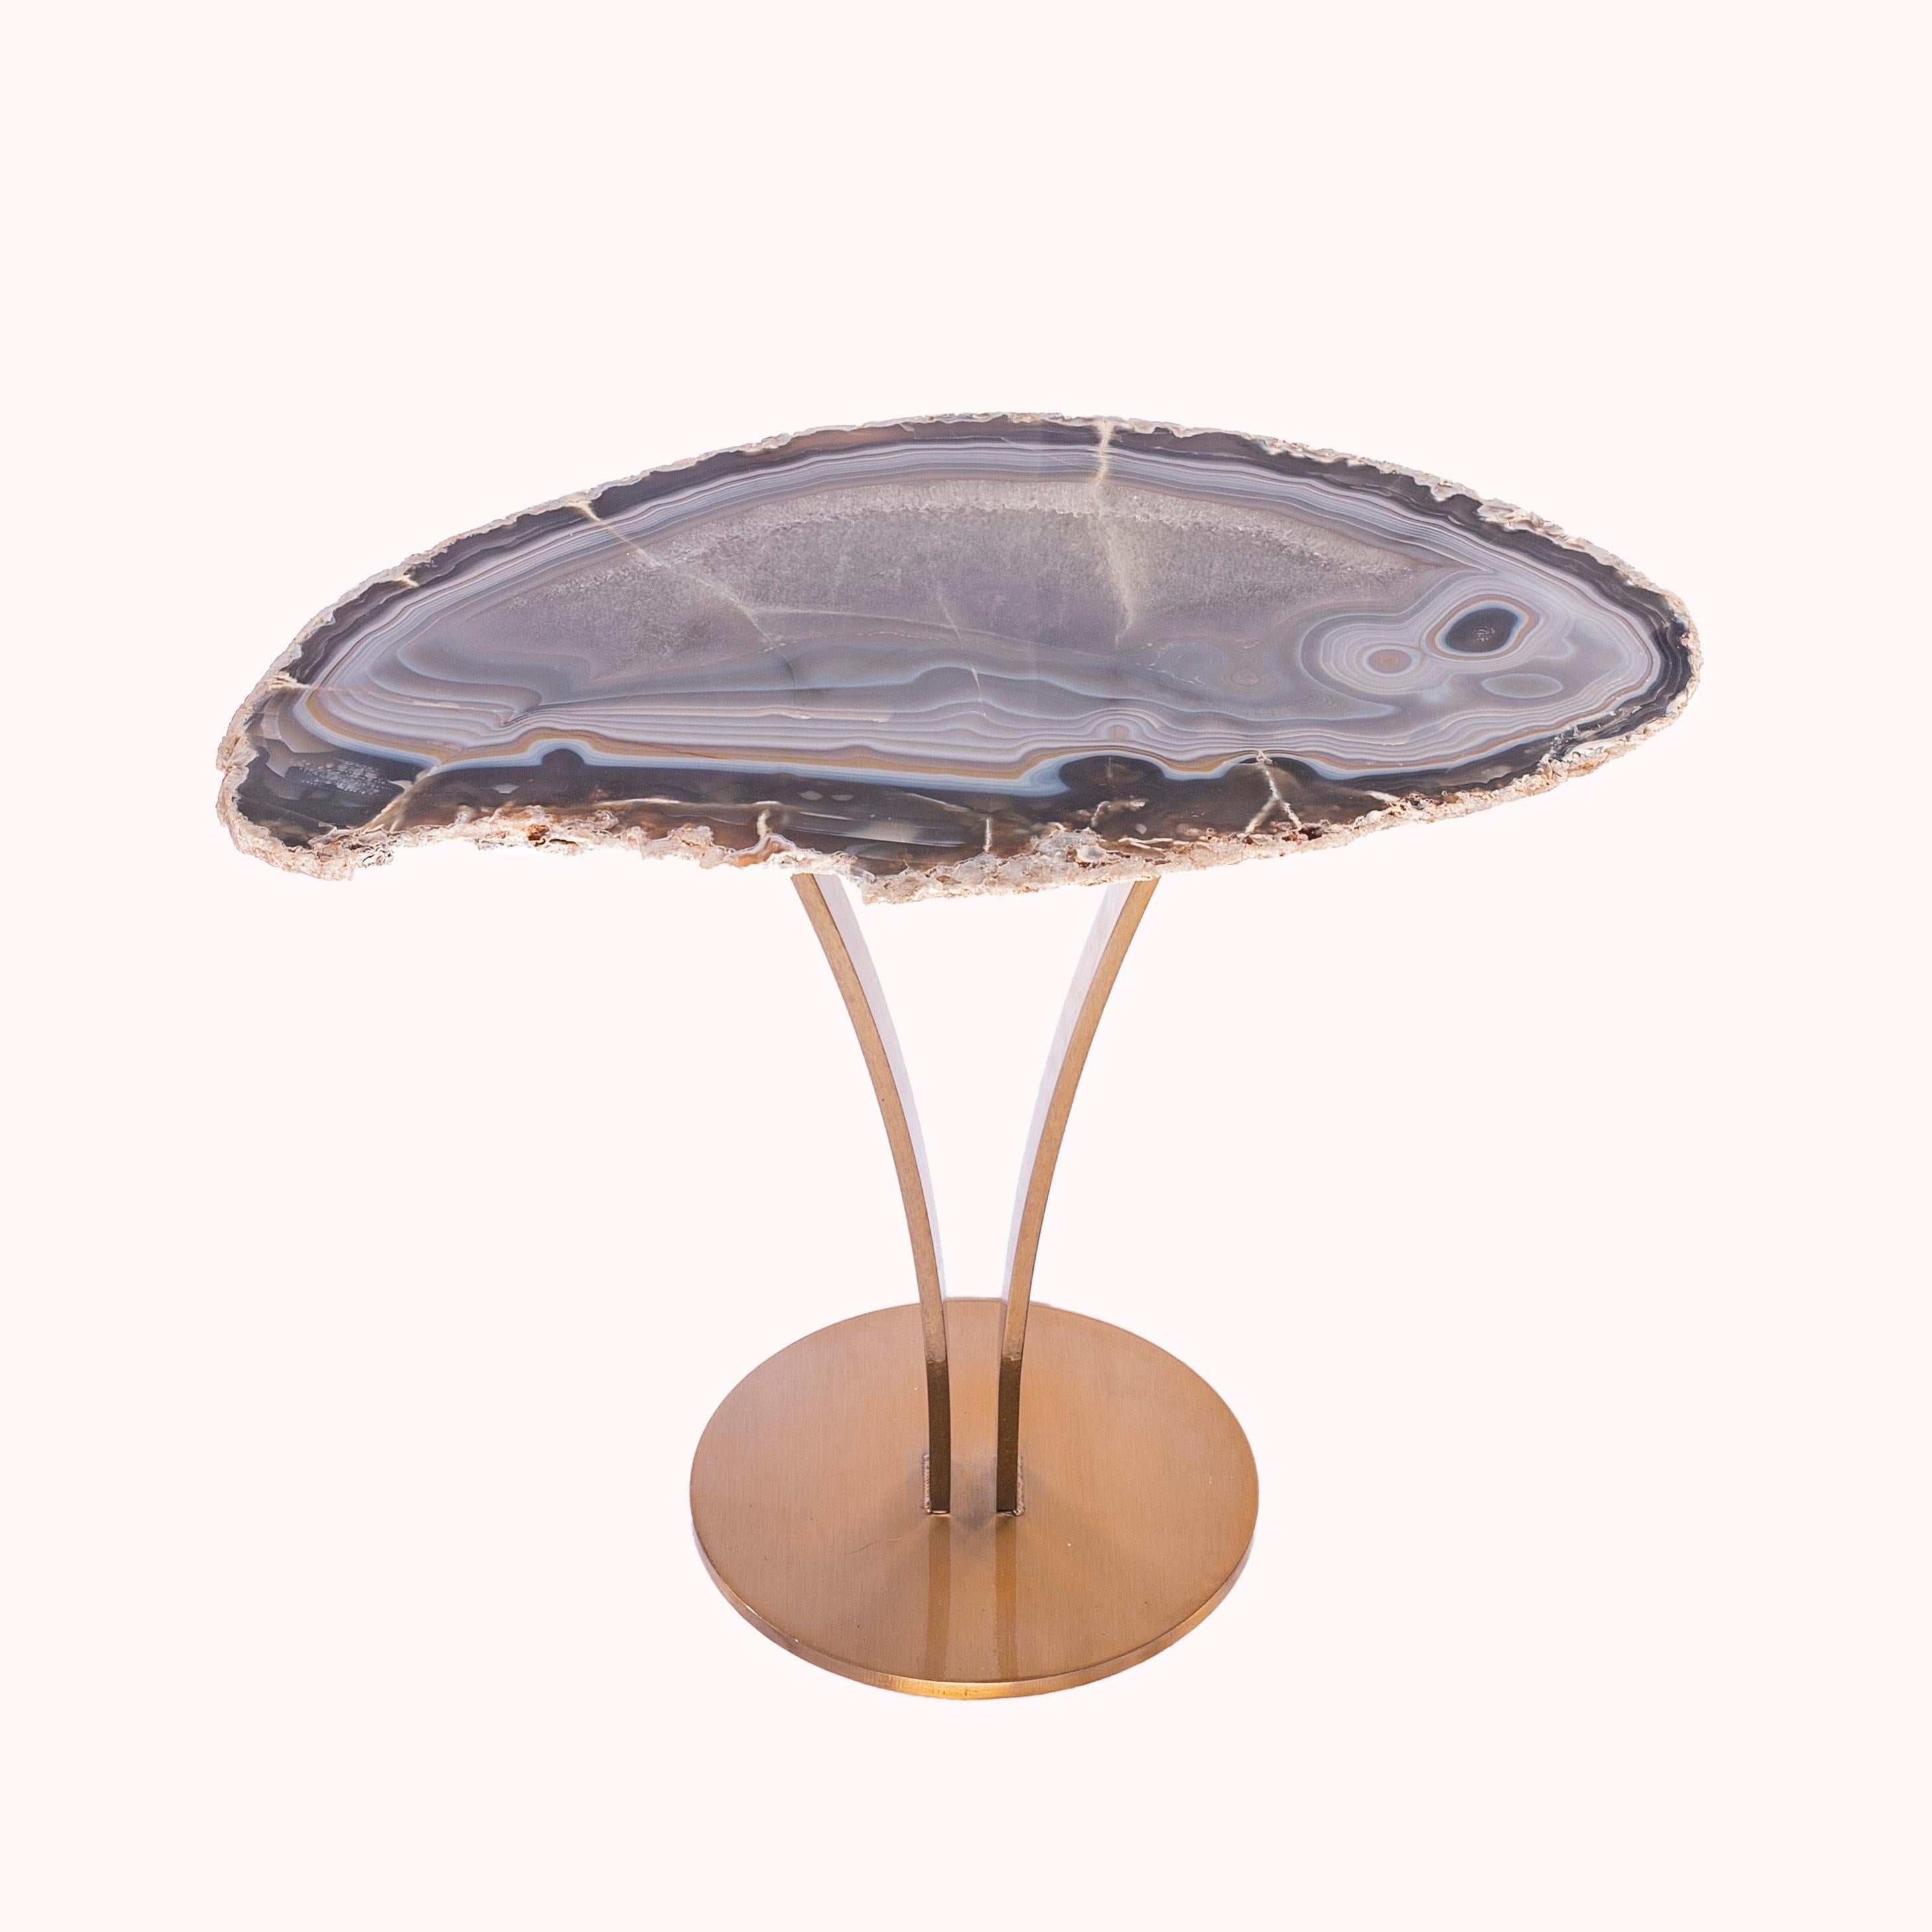 This agate slab forming a side table or cocktail table, is from Brazil and has a combination of colors with hints of blue, grey, brown and white. Agates are formed in rounded nodules, which are sliced open to bring out the internal pattern hidden in